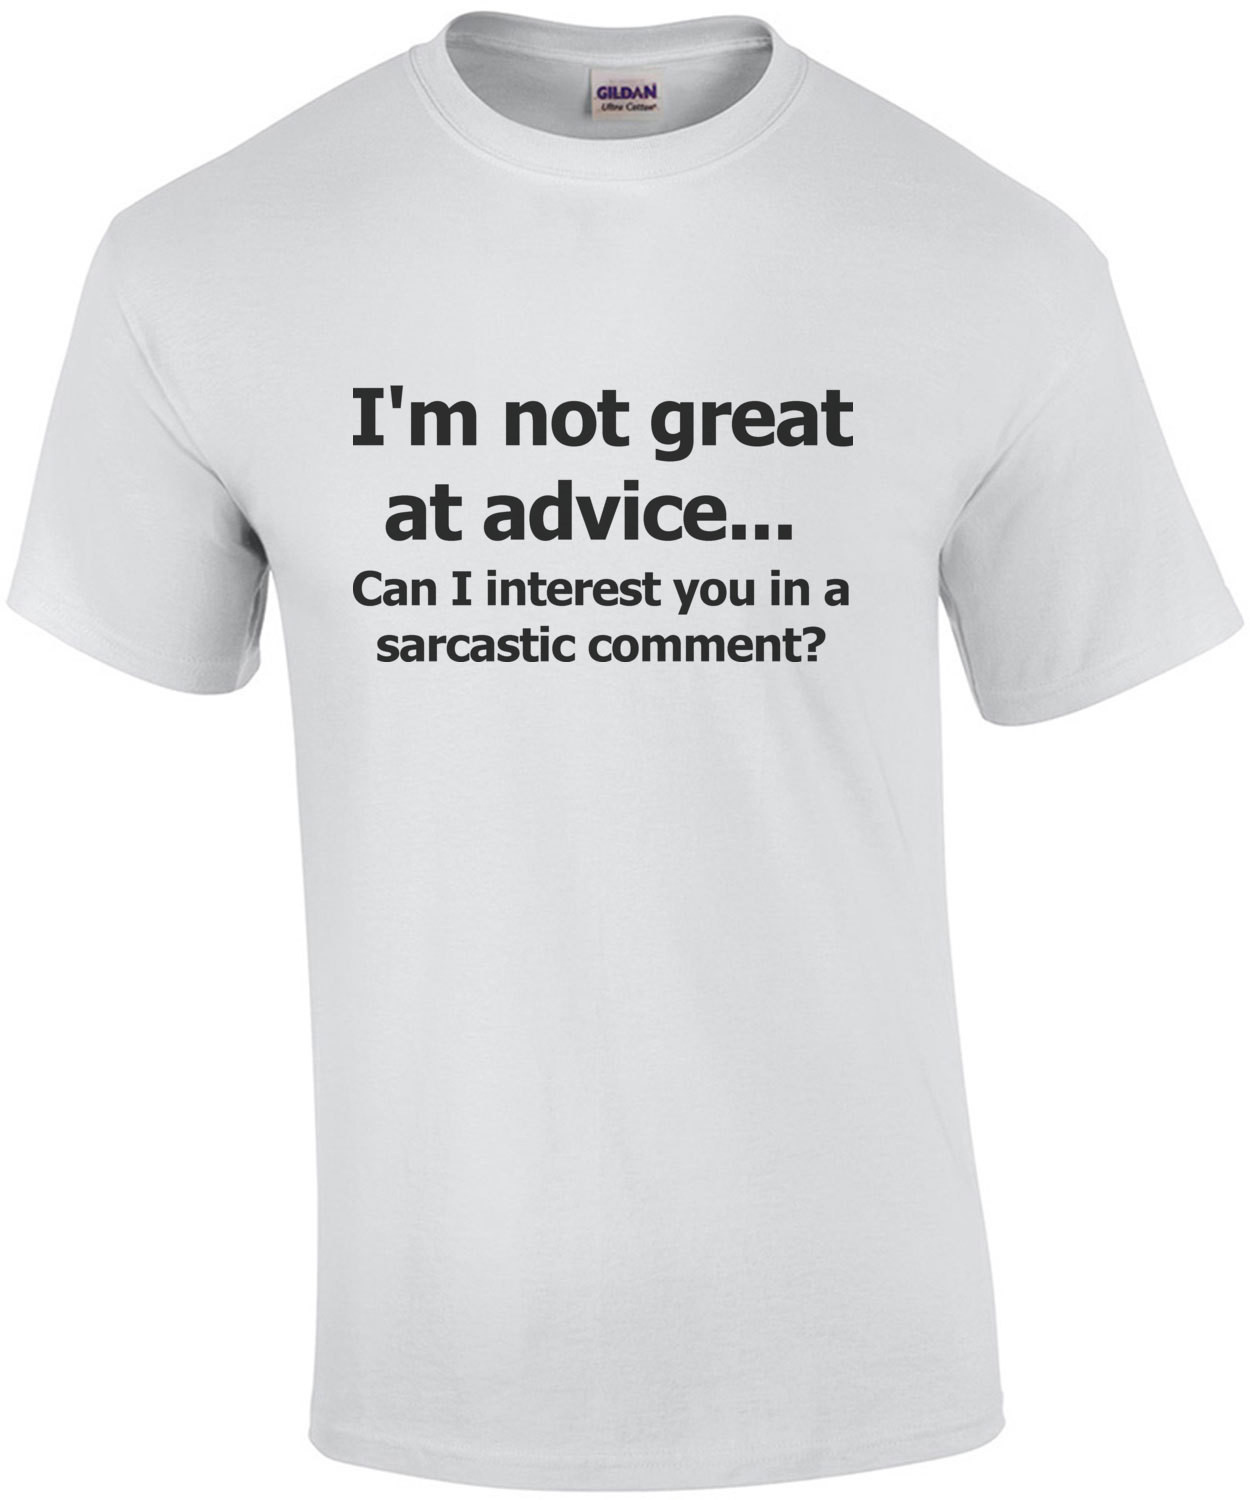 I'm not great at advice... Can I interest you in a sarcastic comment? Funny T-shirt